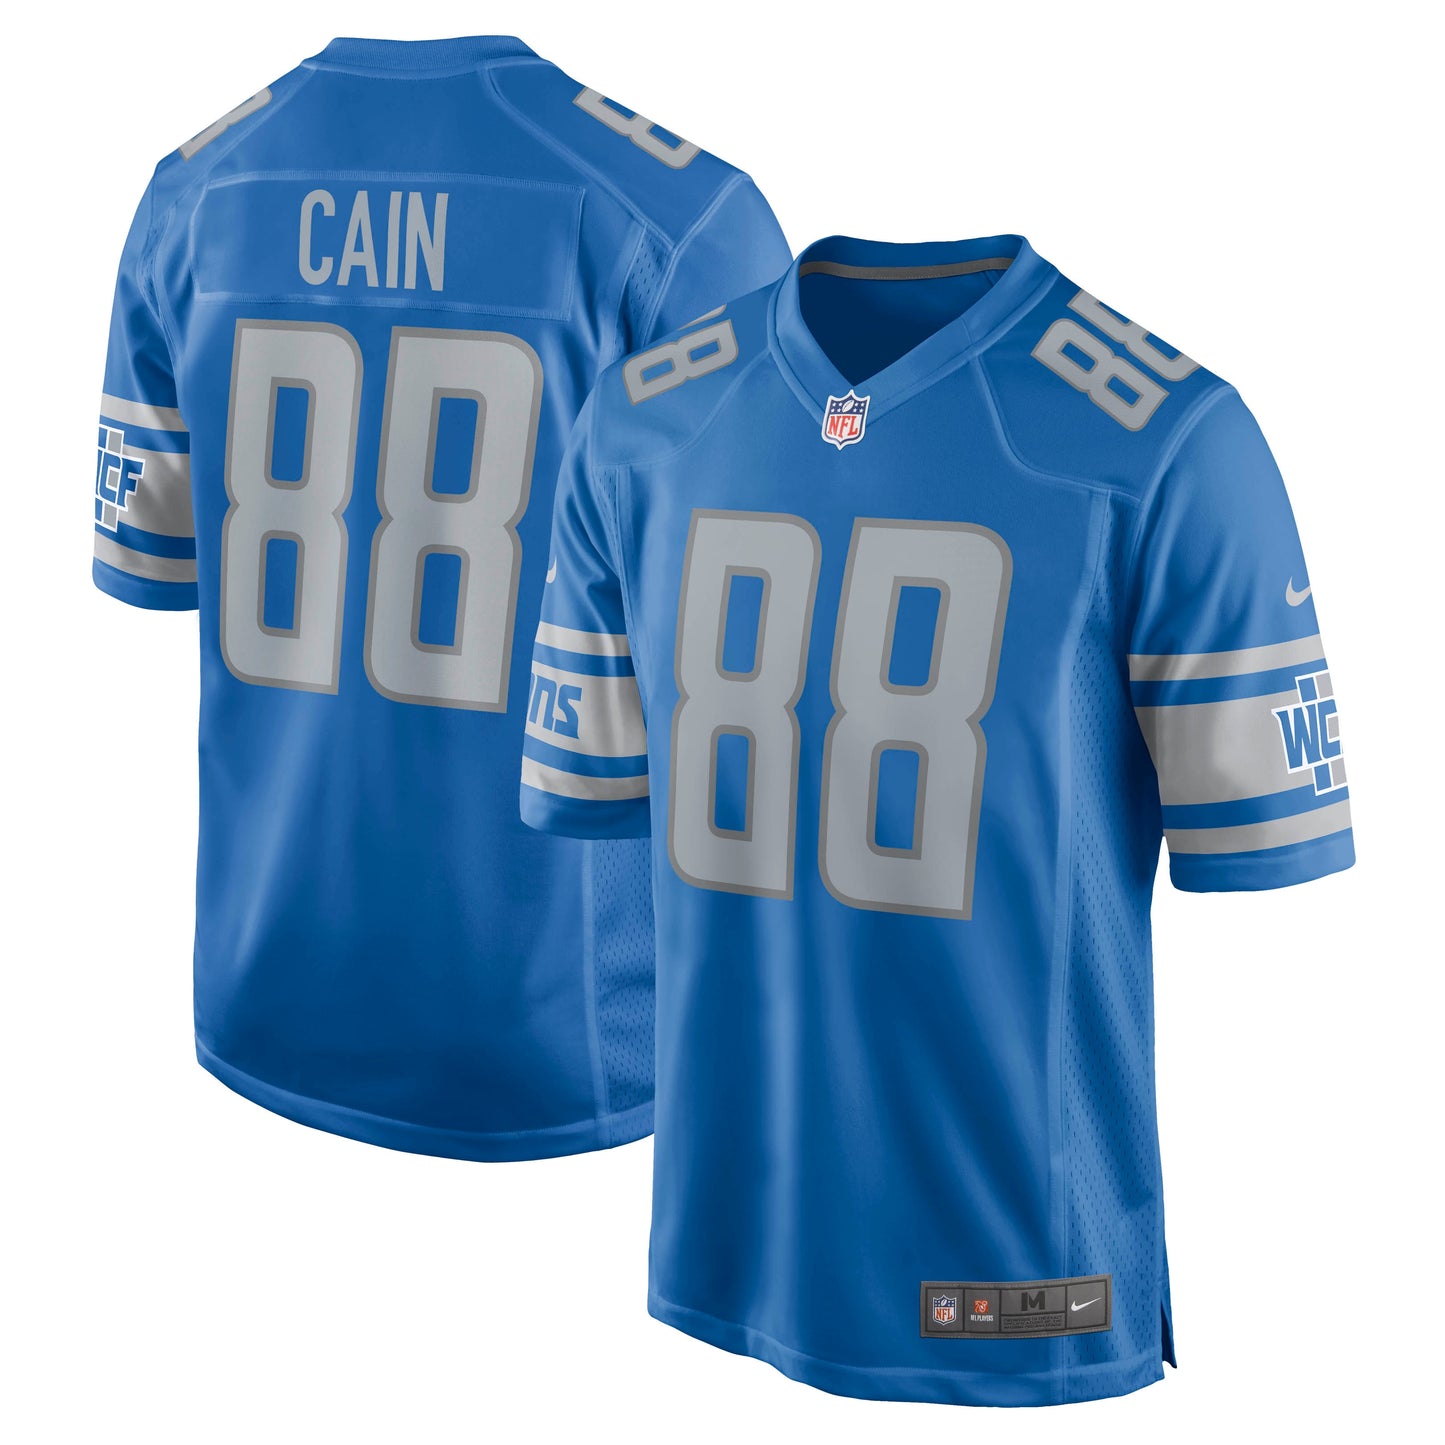 Jim Cain Detroit Lions Nike Retired Player Jersey - Blue